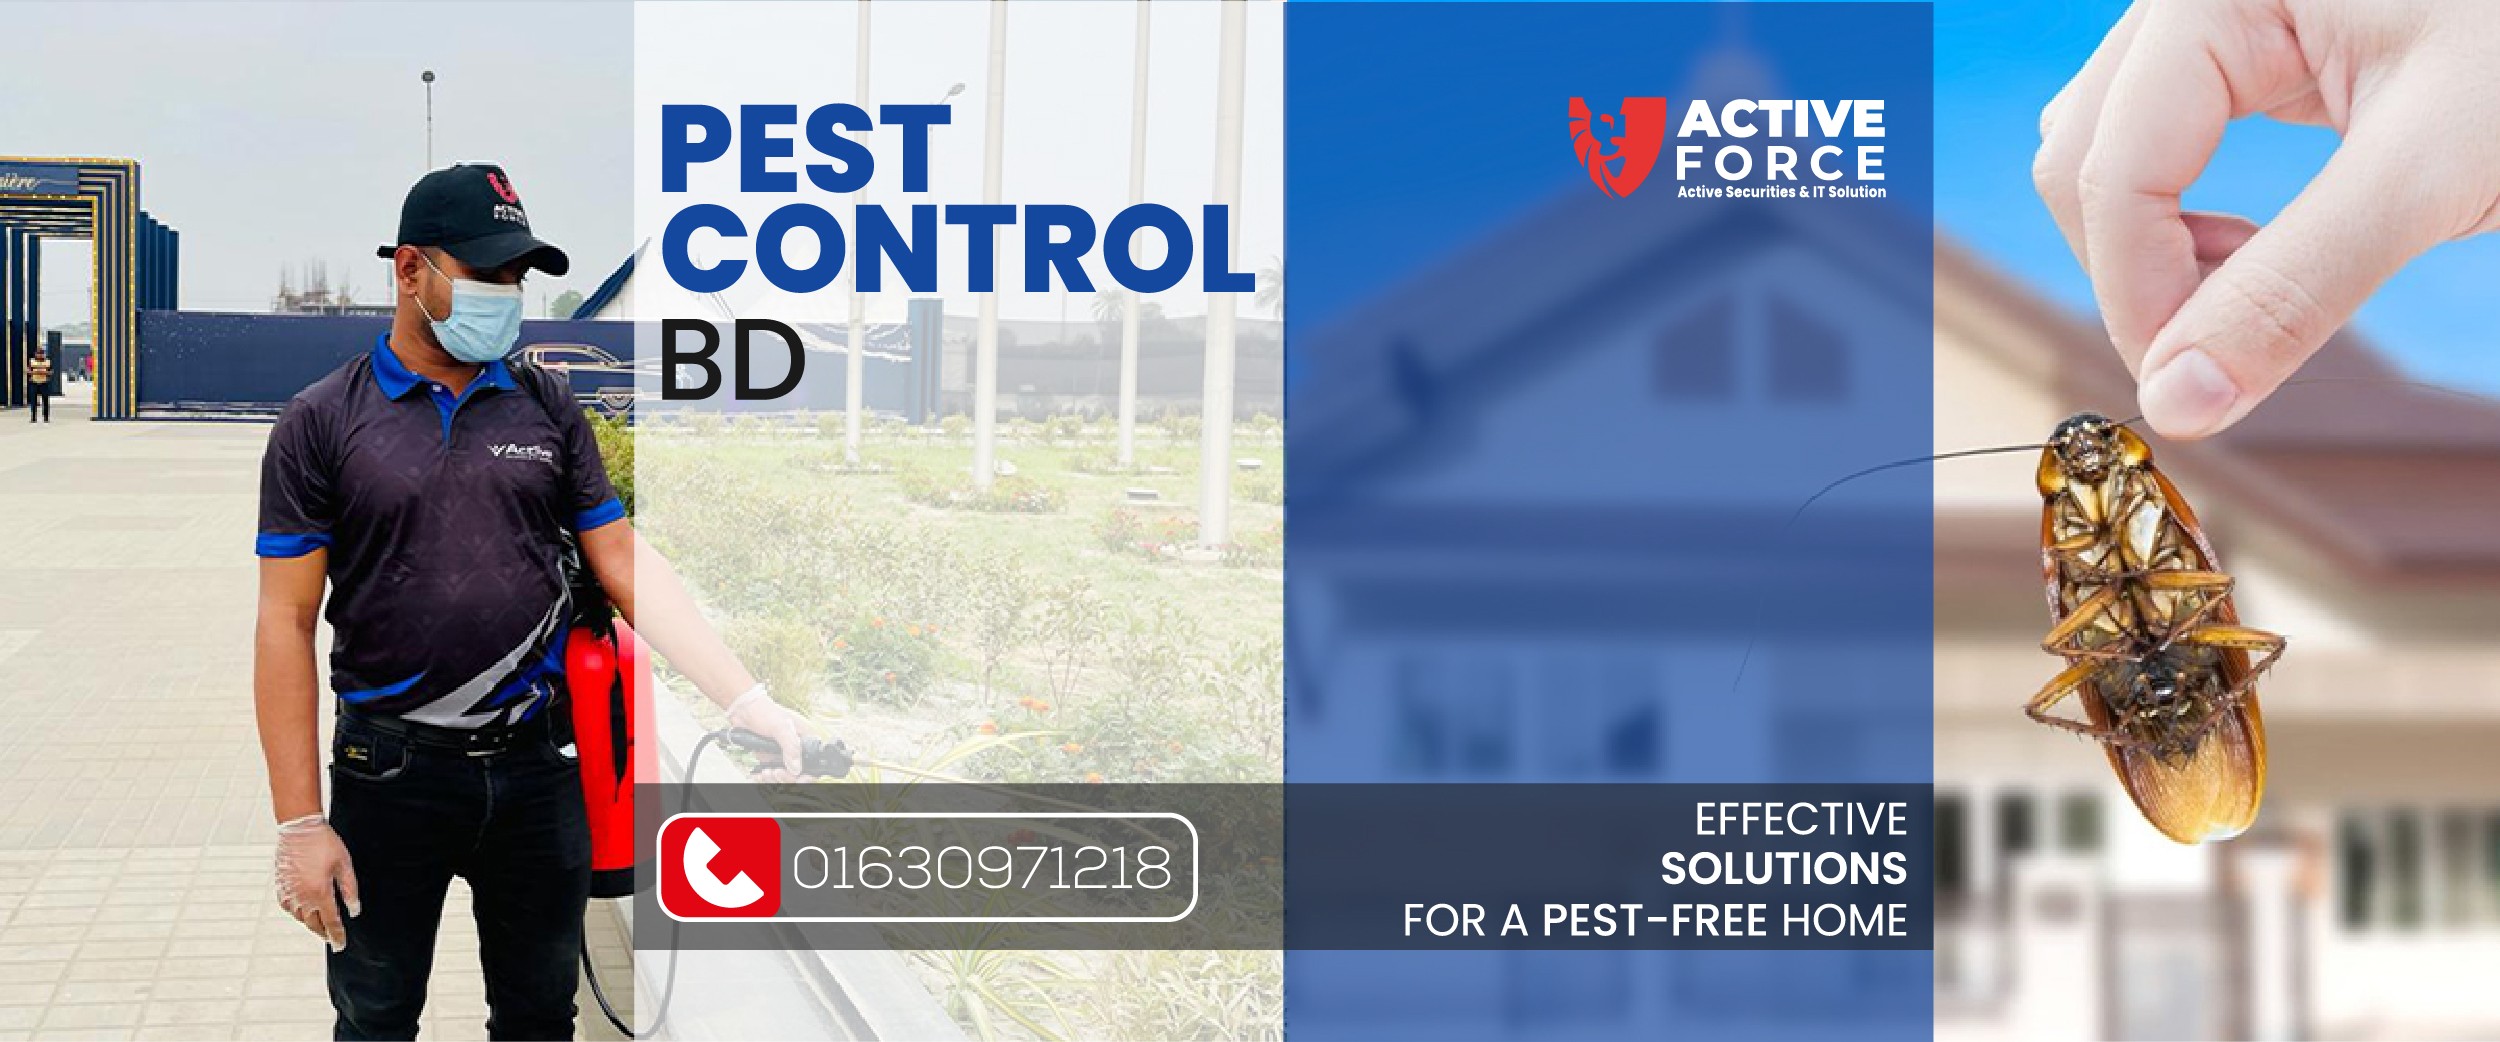 Pest Control BD: Effective Solutions for a Pest-Free Home